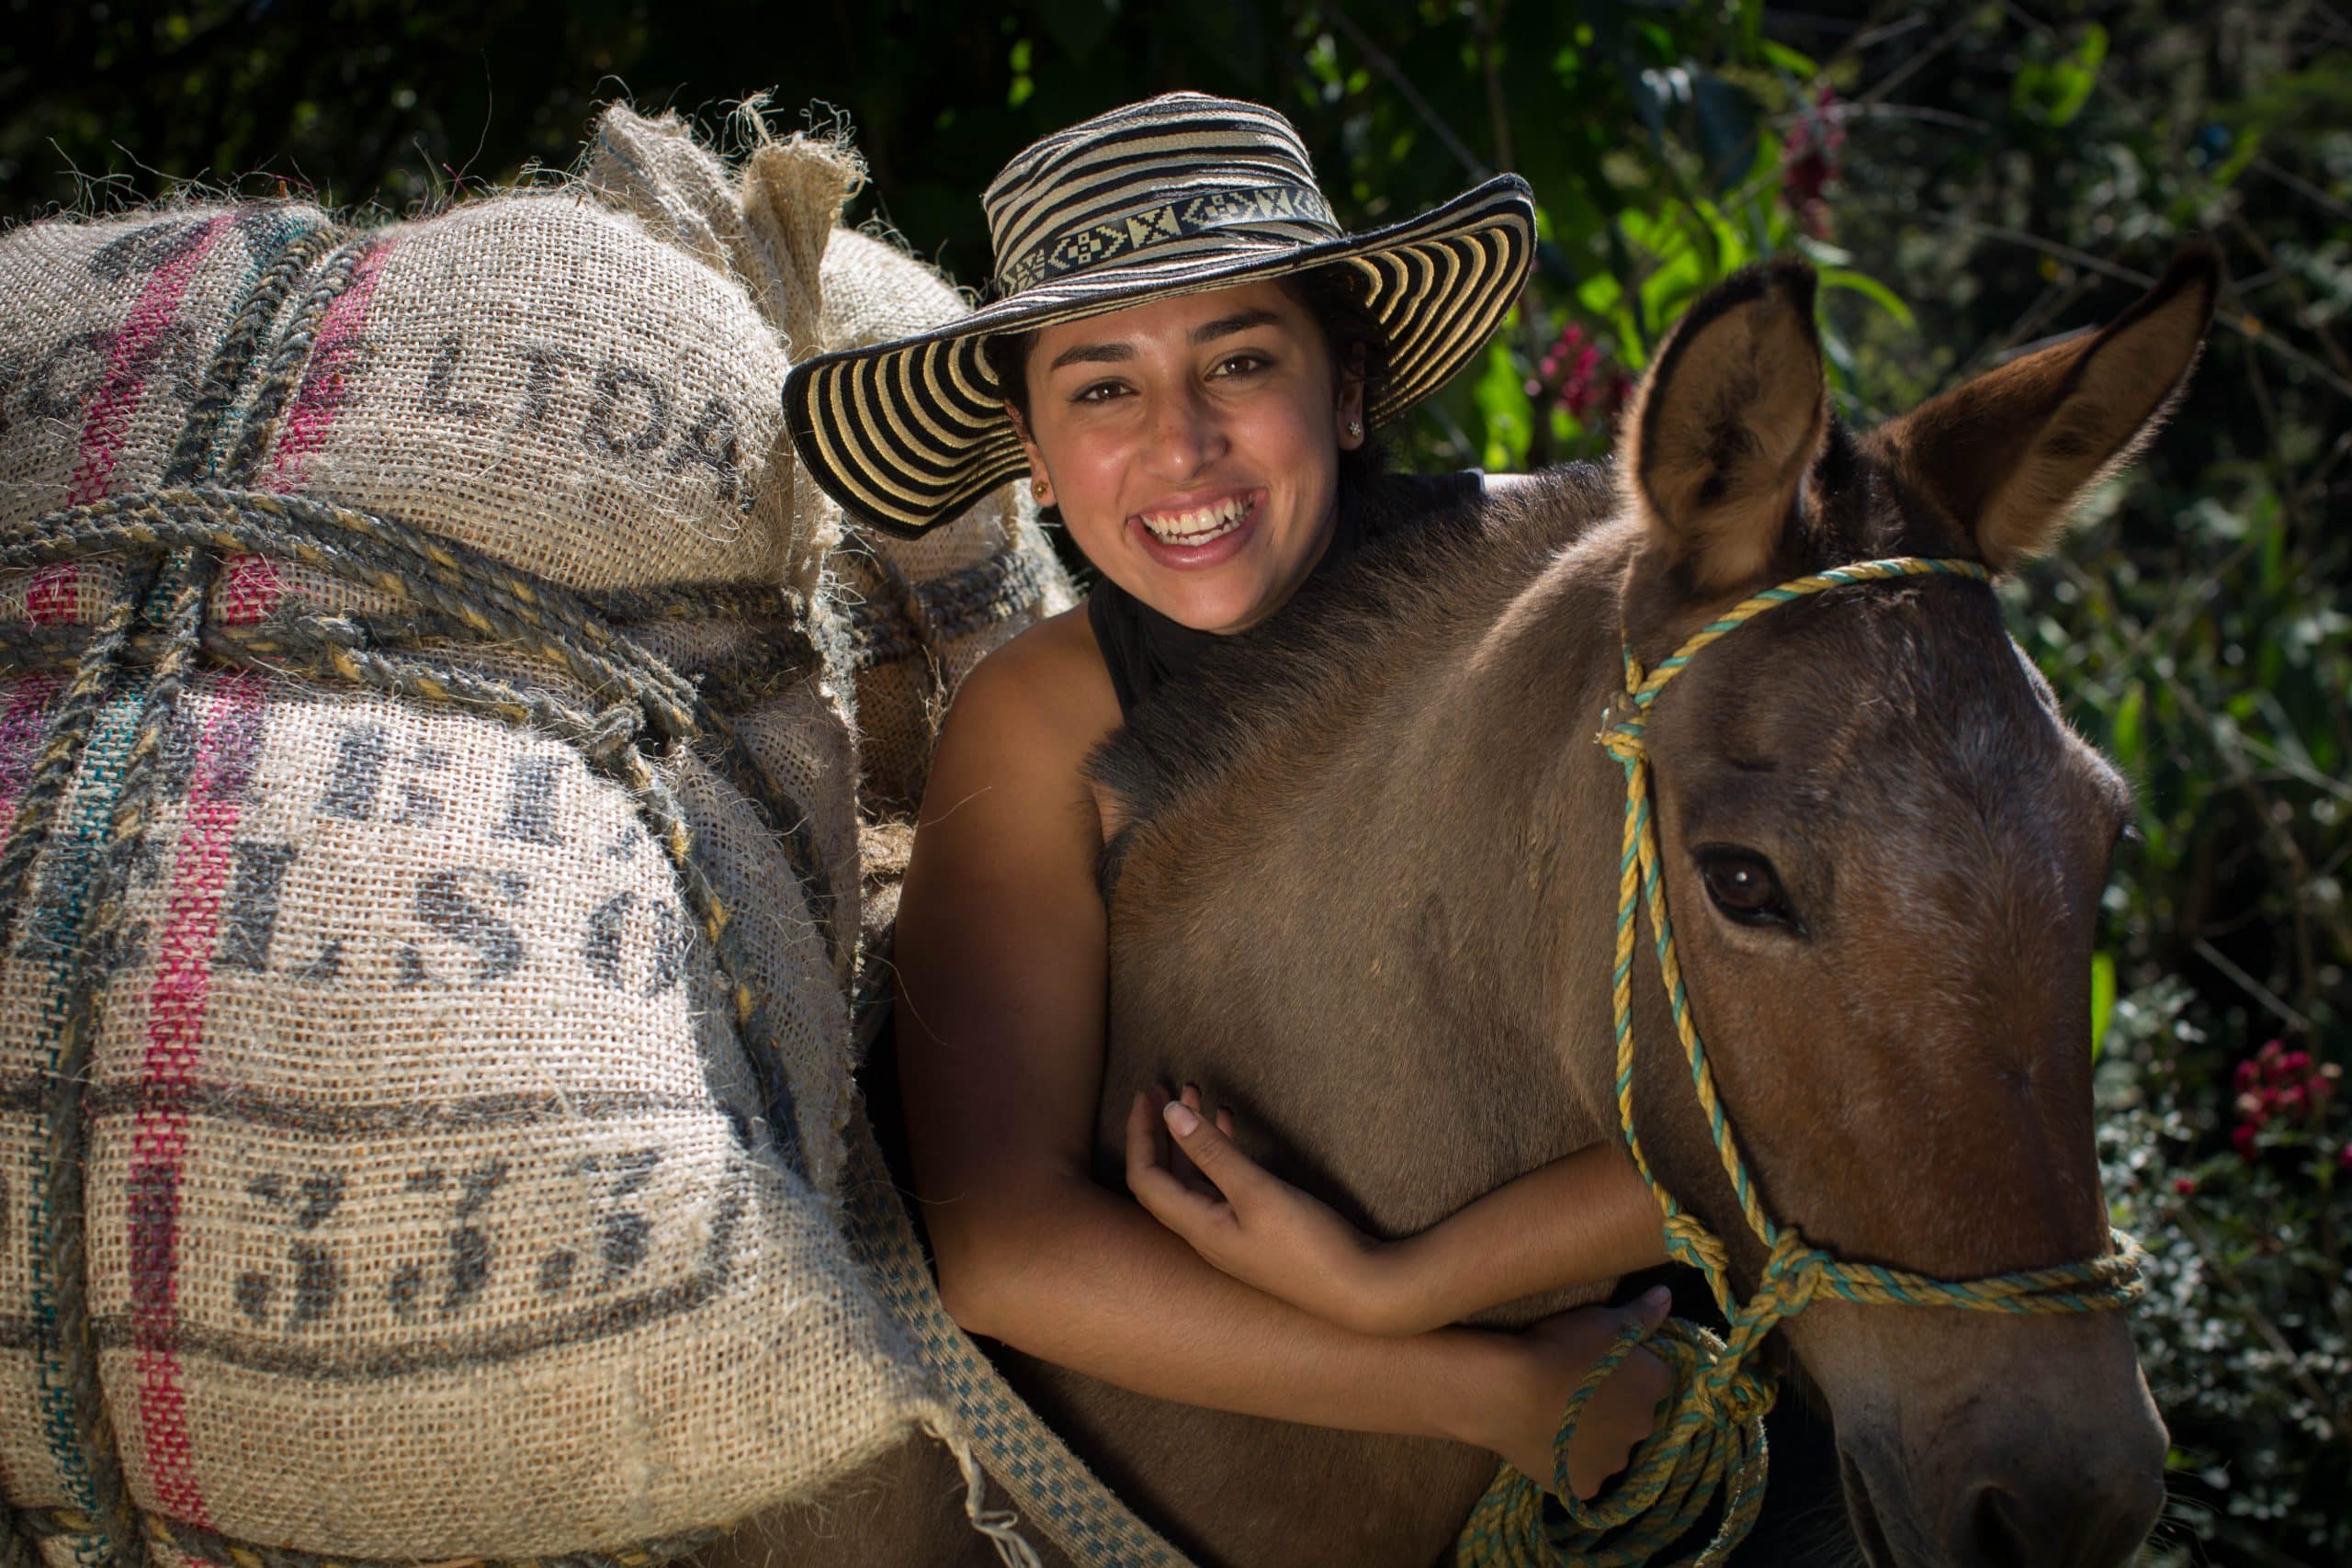 To Rebuild After Conflict, Latin American Farmers Need An Alternative to the Drug Trade